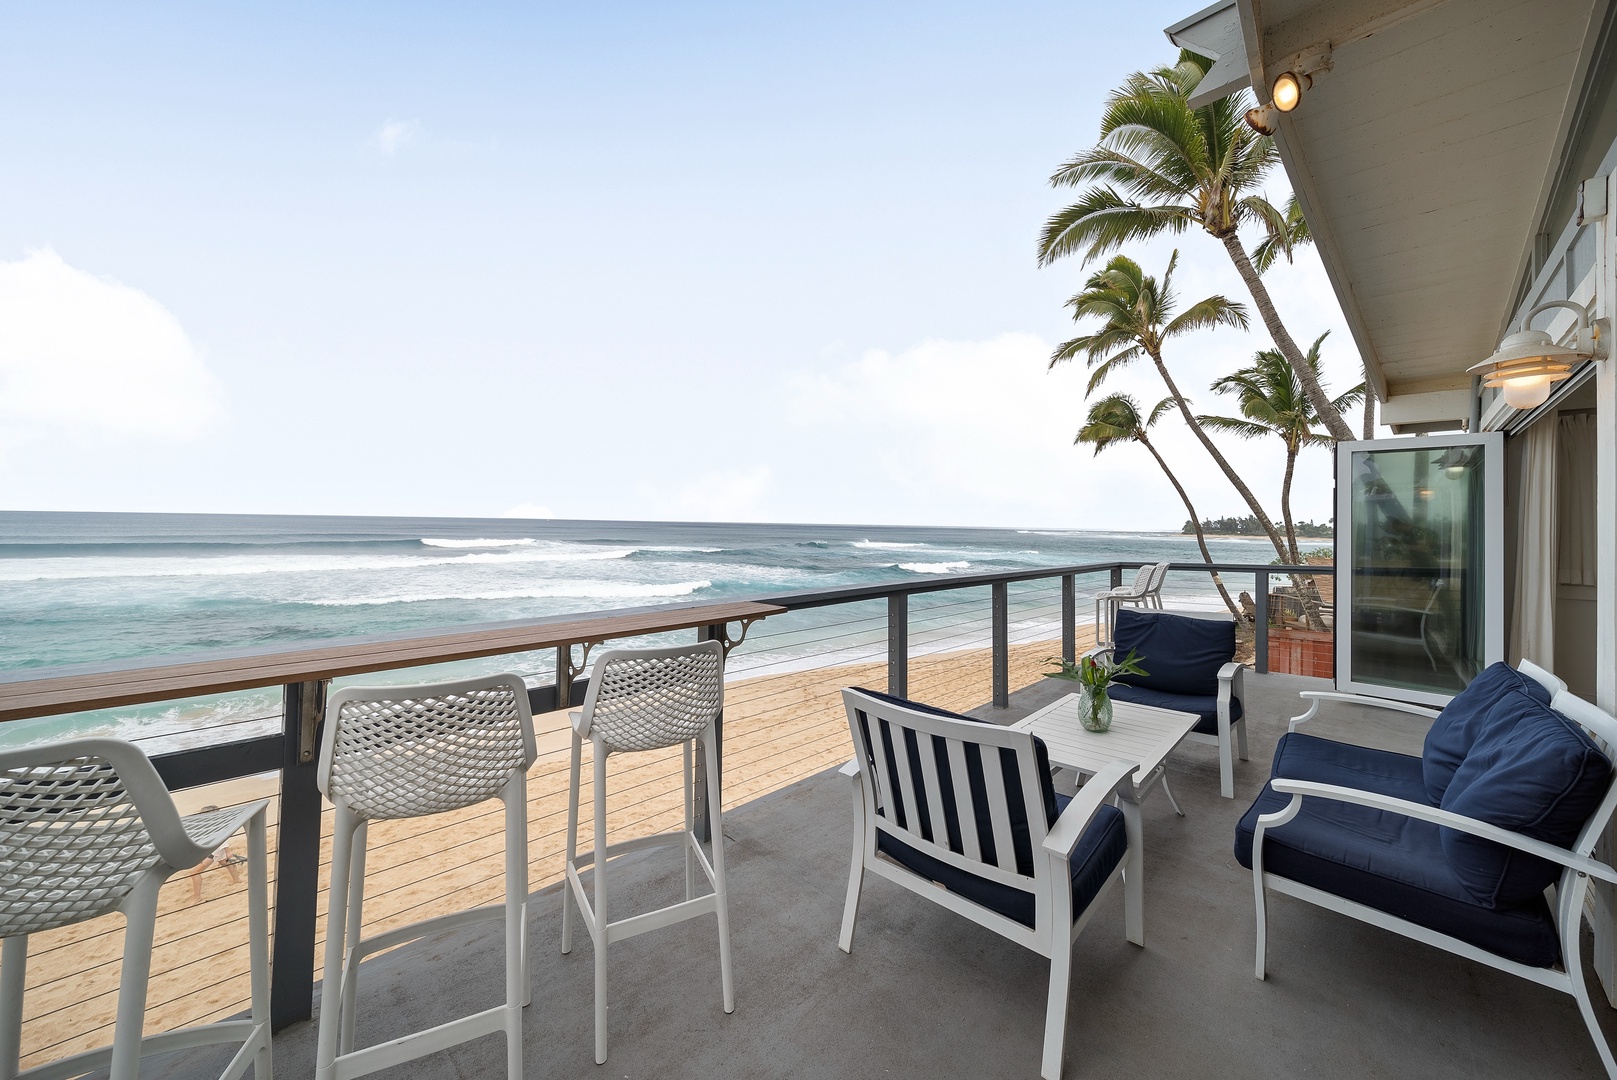 Haleiwa Vacation Rentals, Surfer's Paradise - Breathtaking ocean views from the comfort of your upper-level private deck